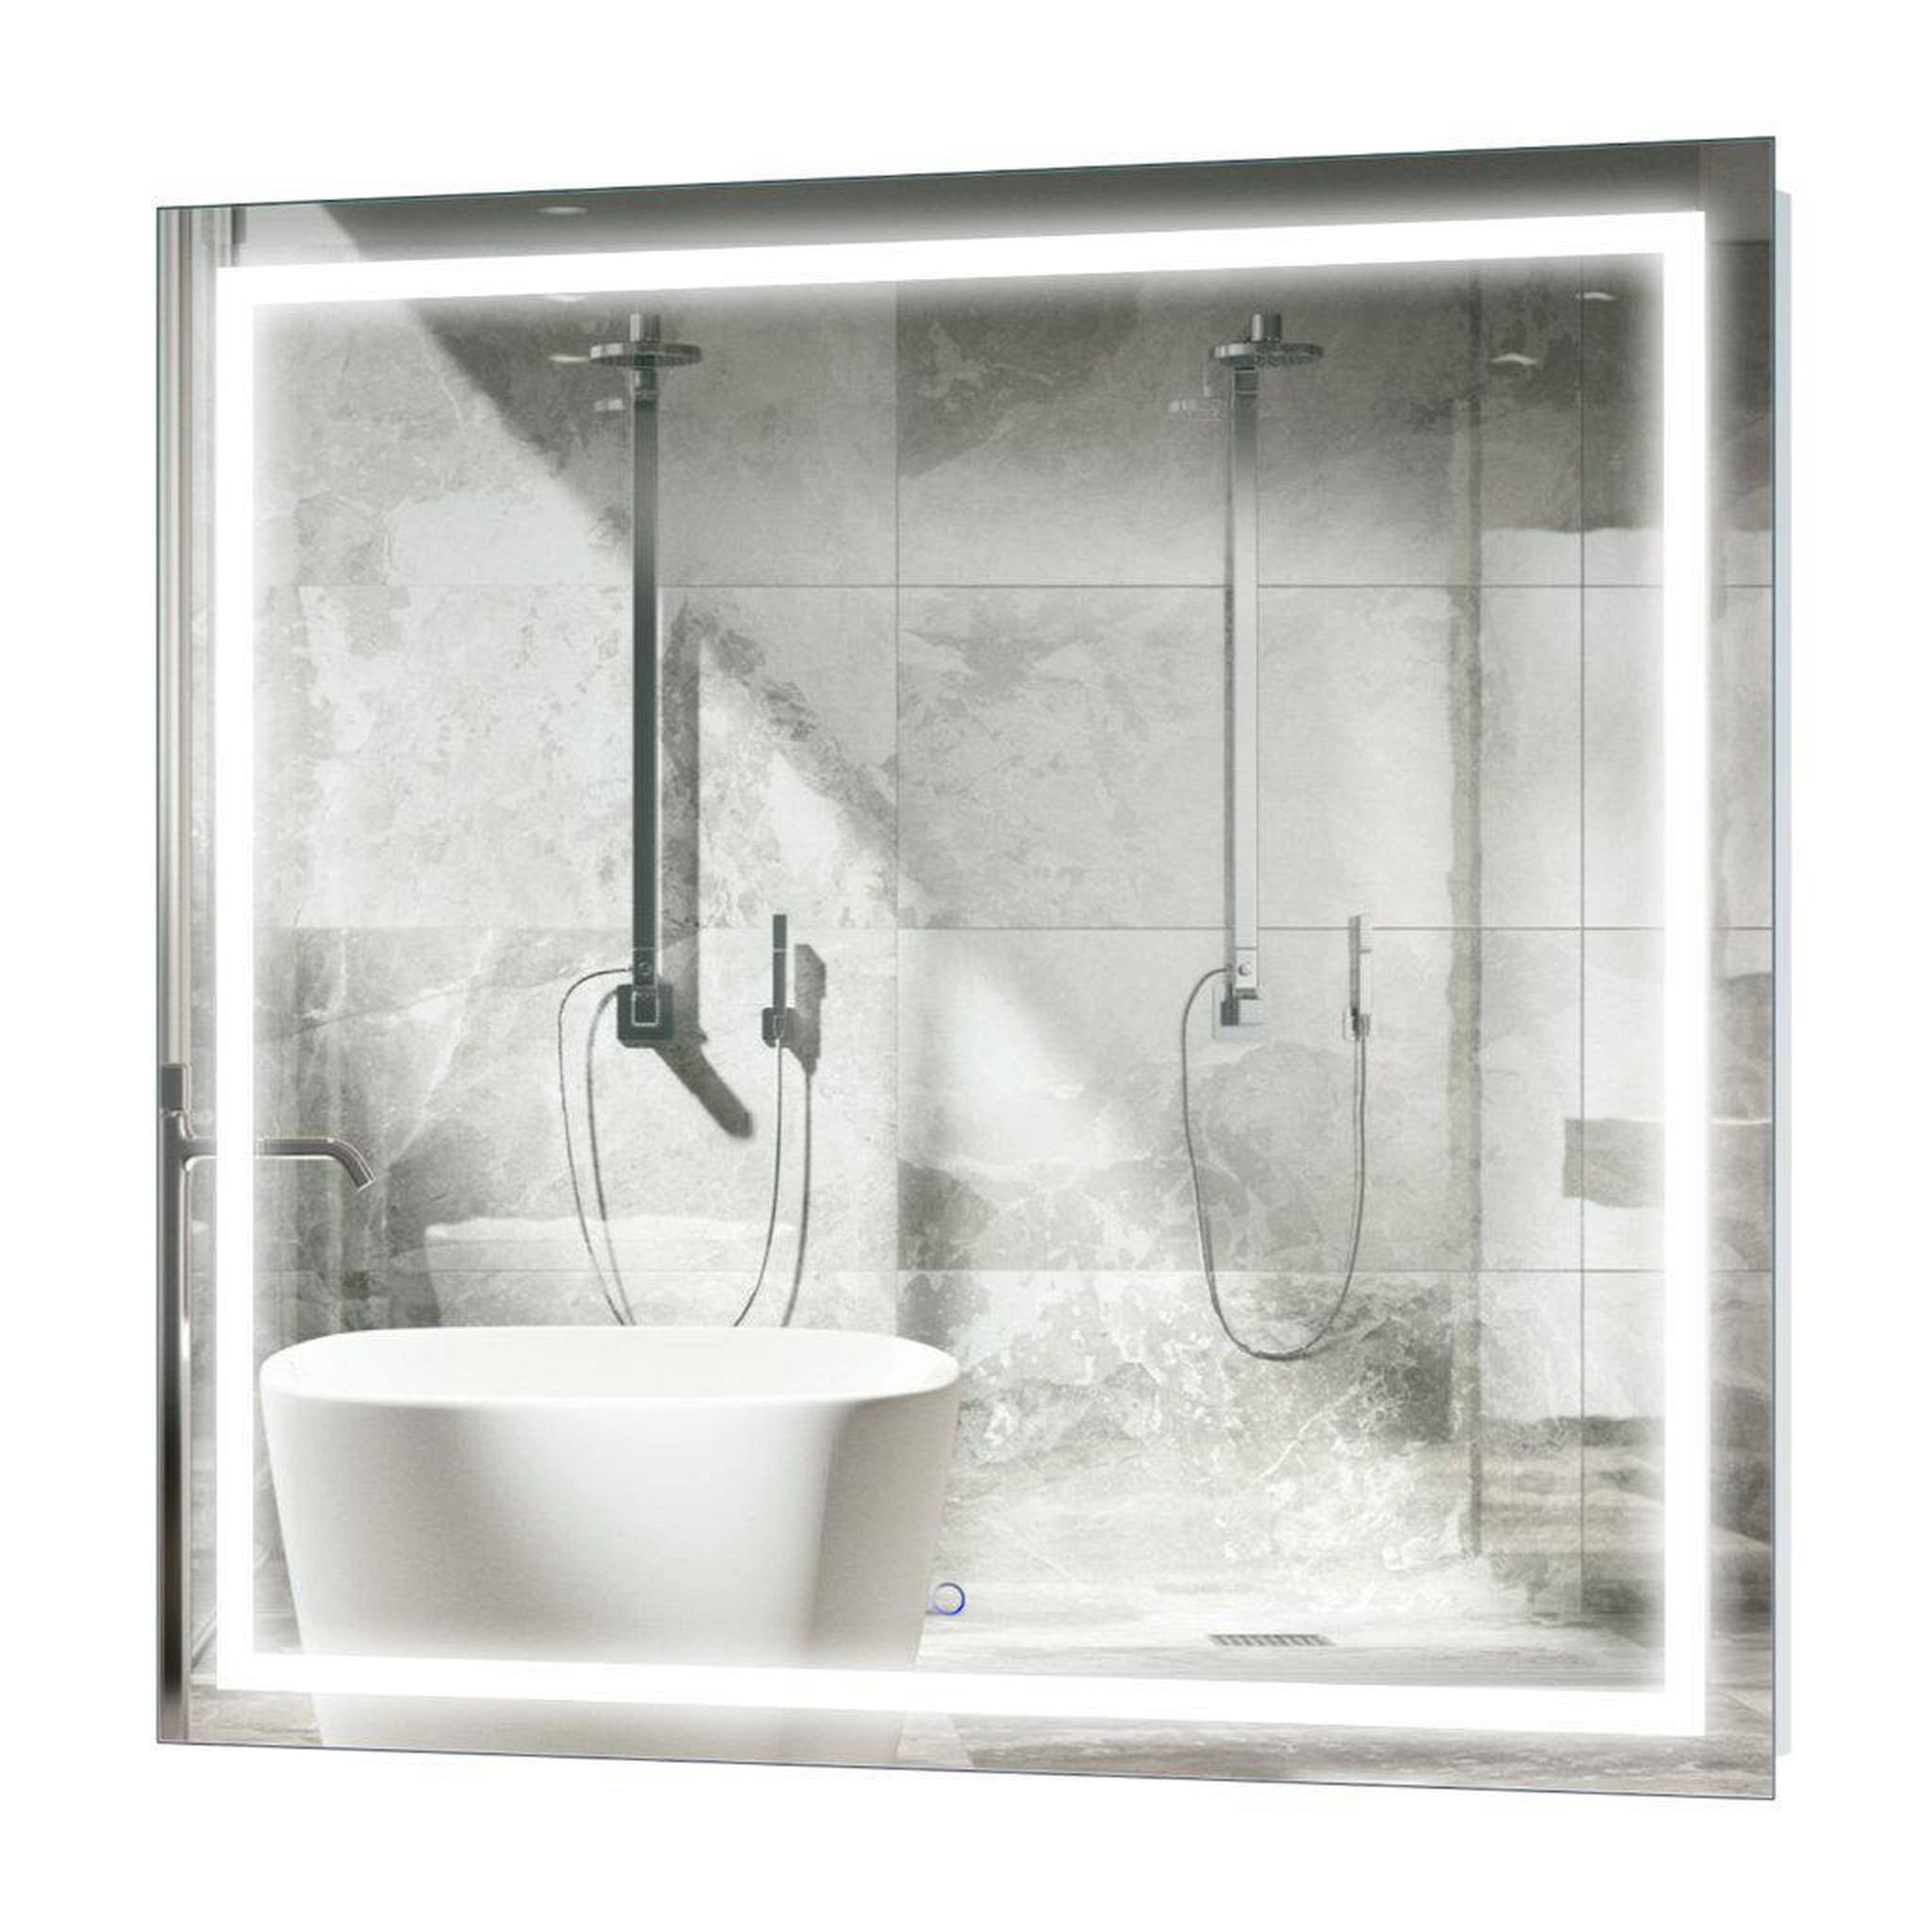 Krugg Reflections, Krugg Reflections Icon 42” x 42” 5000K Square Wall-Mounted Illuminated Silver Backed LED  Mirror With Built-in Defogger and Touch Sensor On/Off Built-in Dimmer